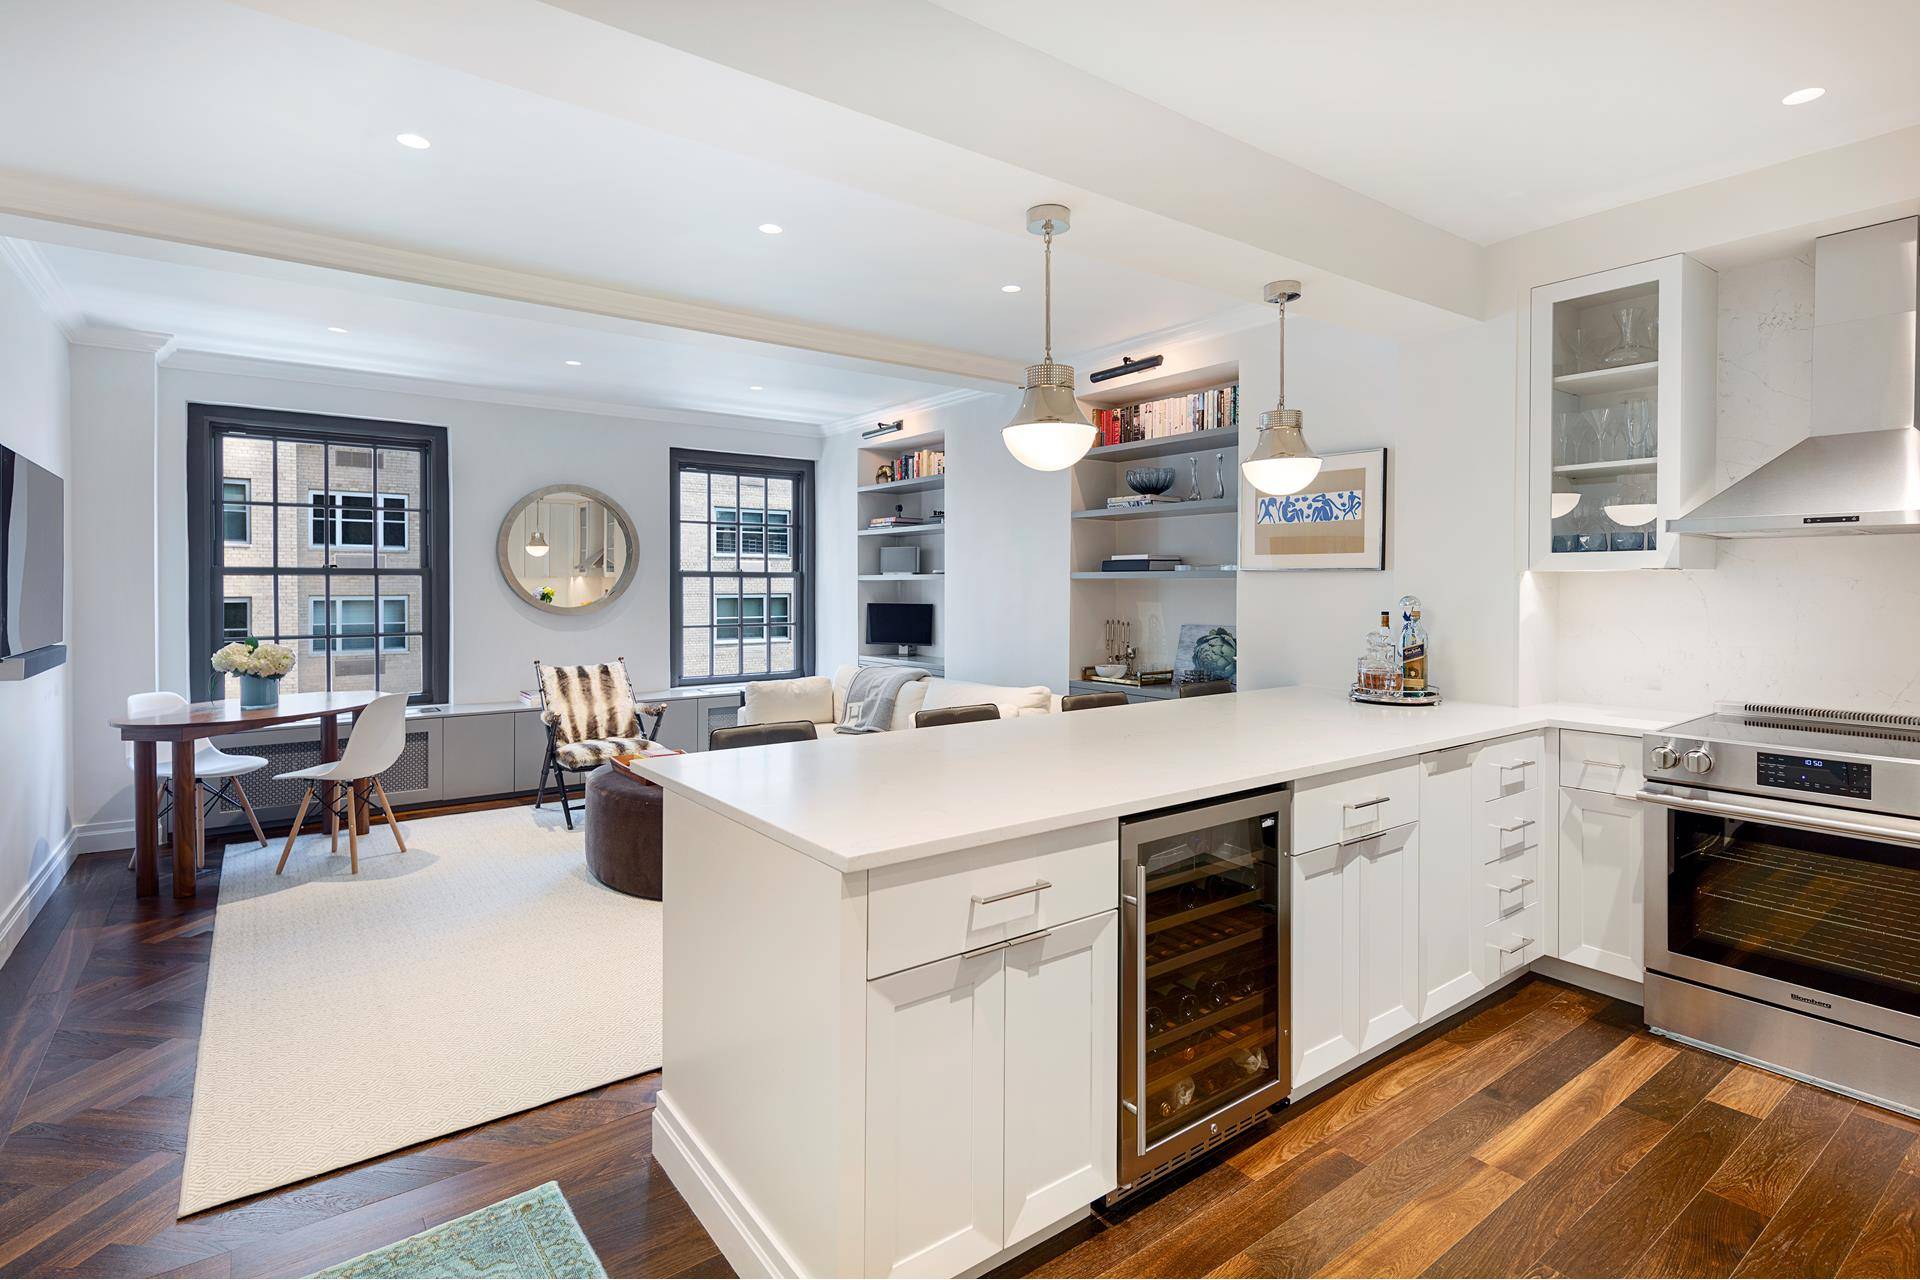 One Fifth Avenue 6B We are pleased to introduce this exceptional, expertly renovated property which is one of the top 2 Bedroom homes here in the Heart of Greenwich Village.